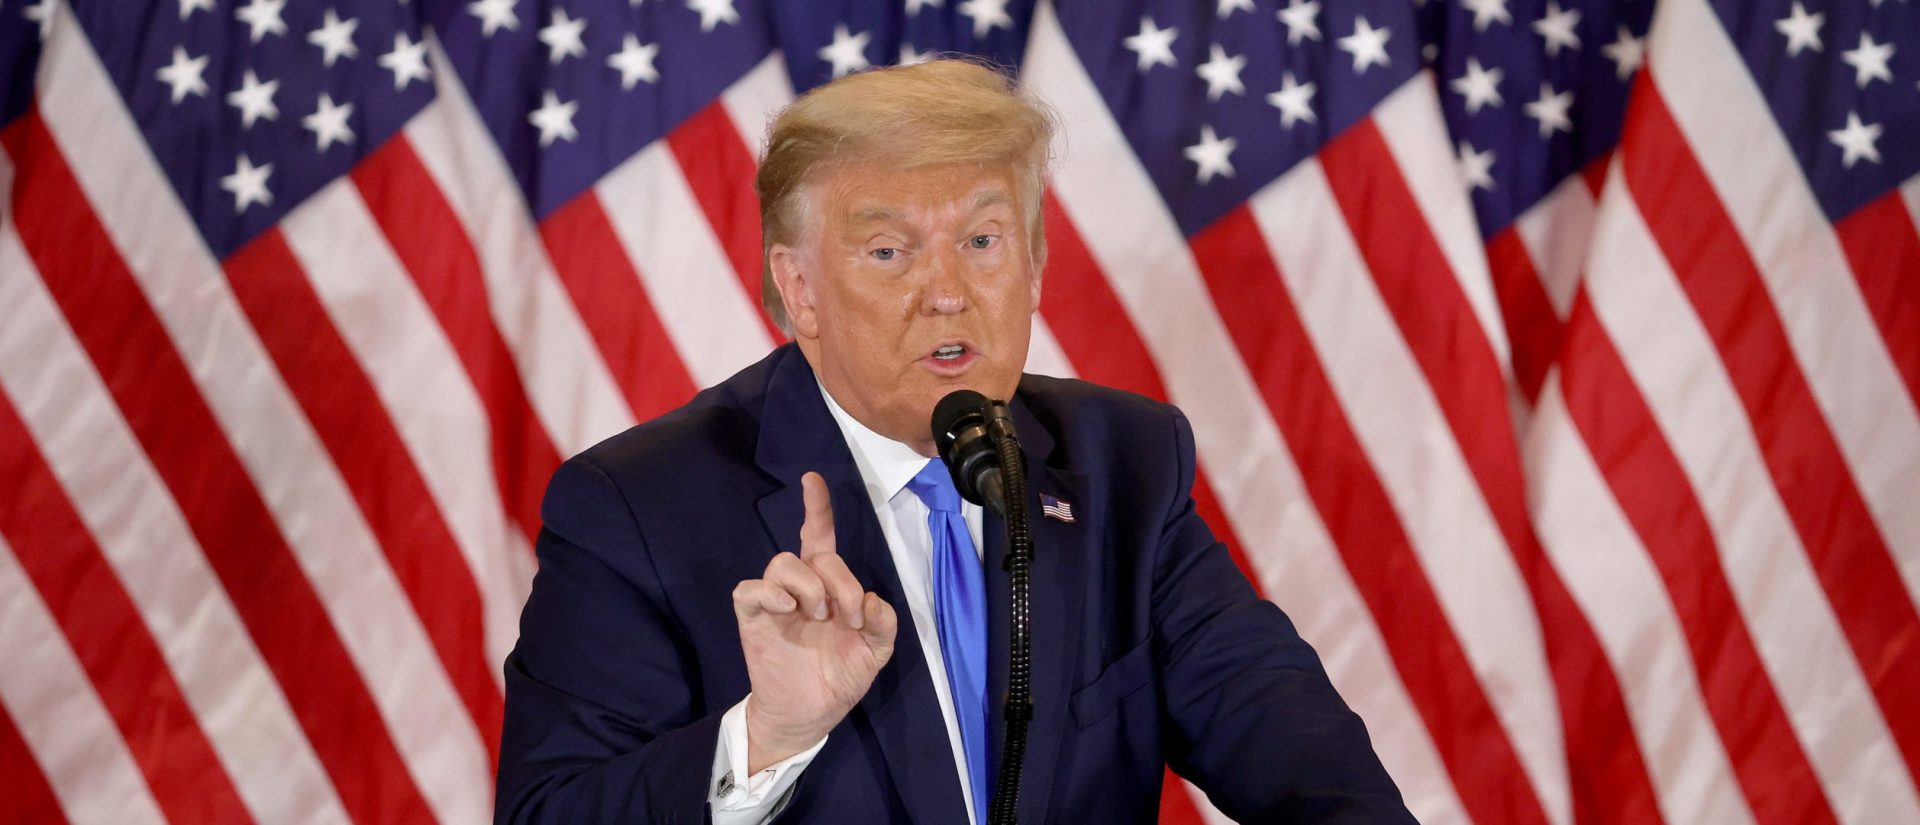 ‘A ways From Over’: President Trump Rejects Media Calling Speed For Biden, Facets To ‘Authentic’ Upright Challenges